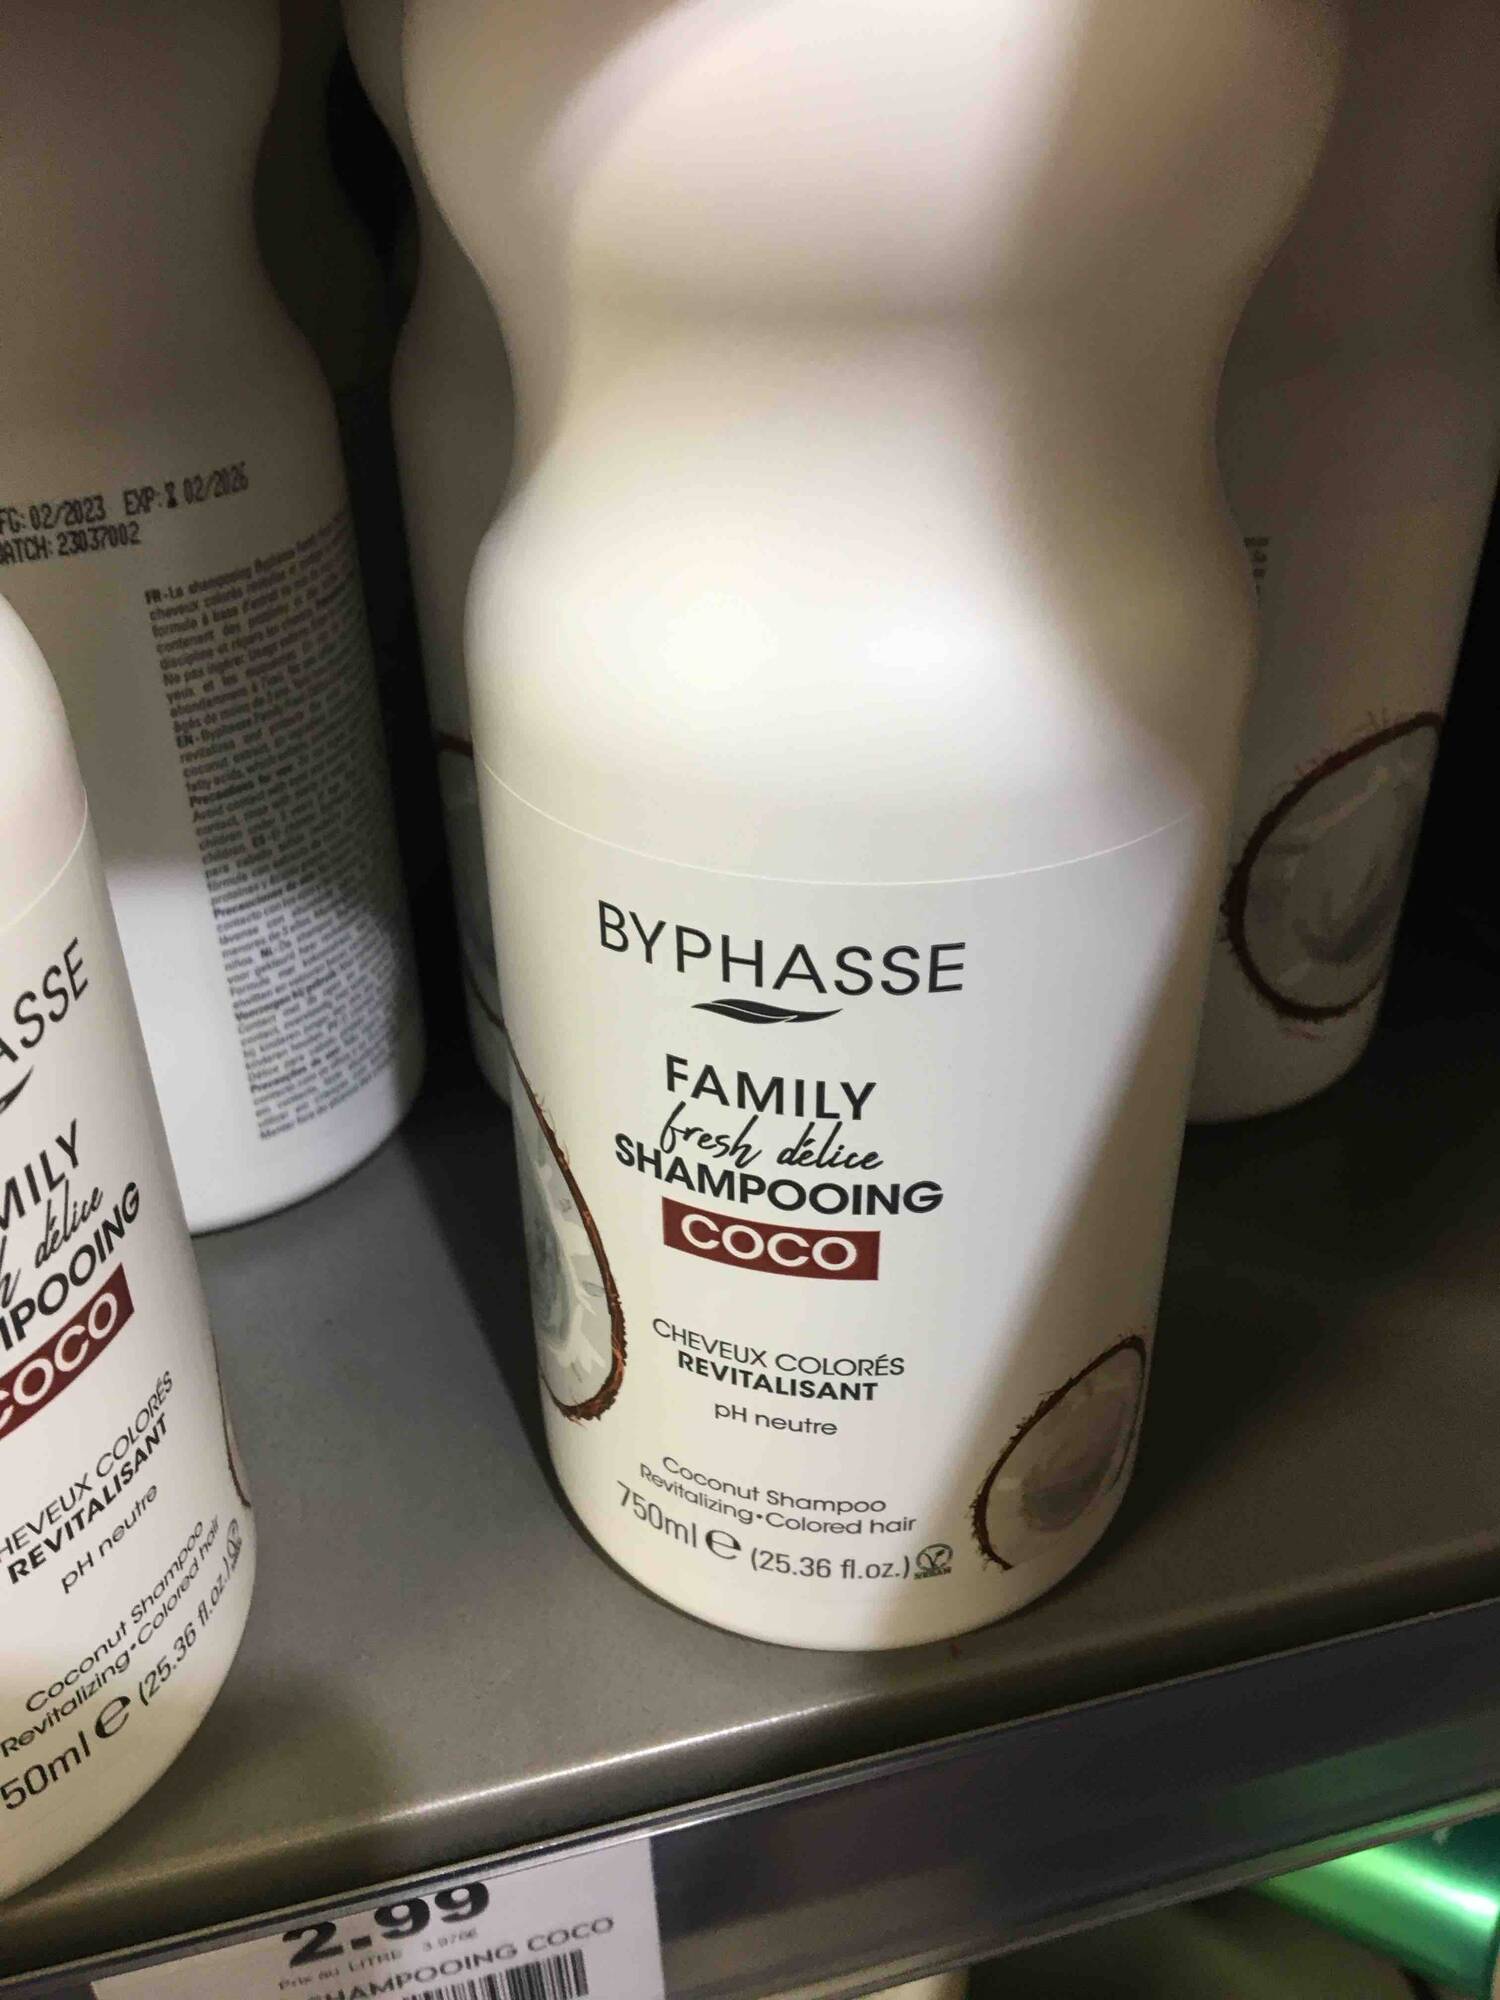 BYPHASSE - Family fresh délice - Shampooing coco